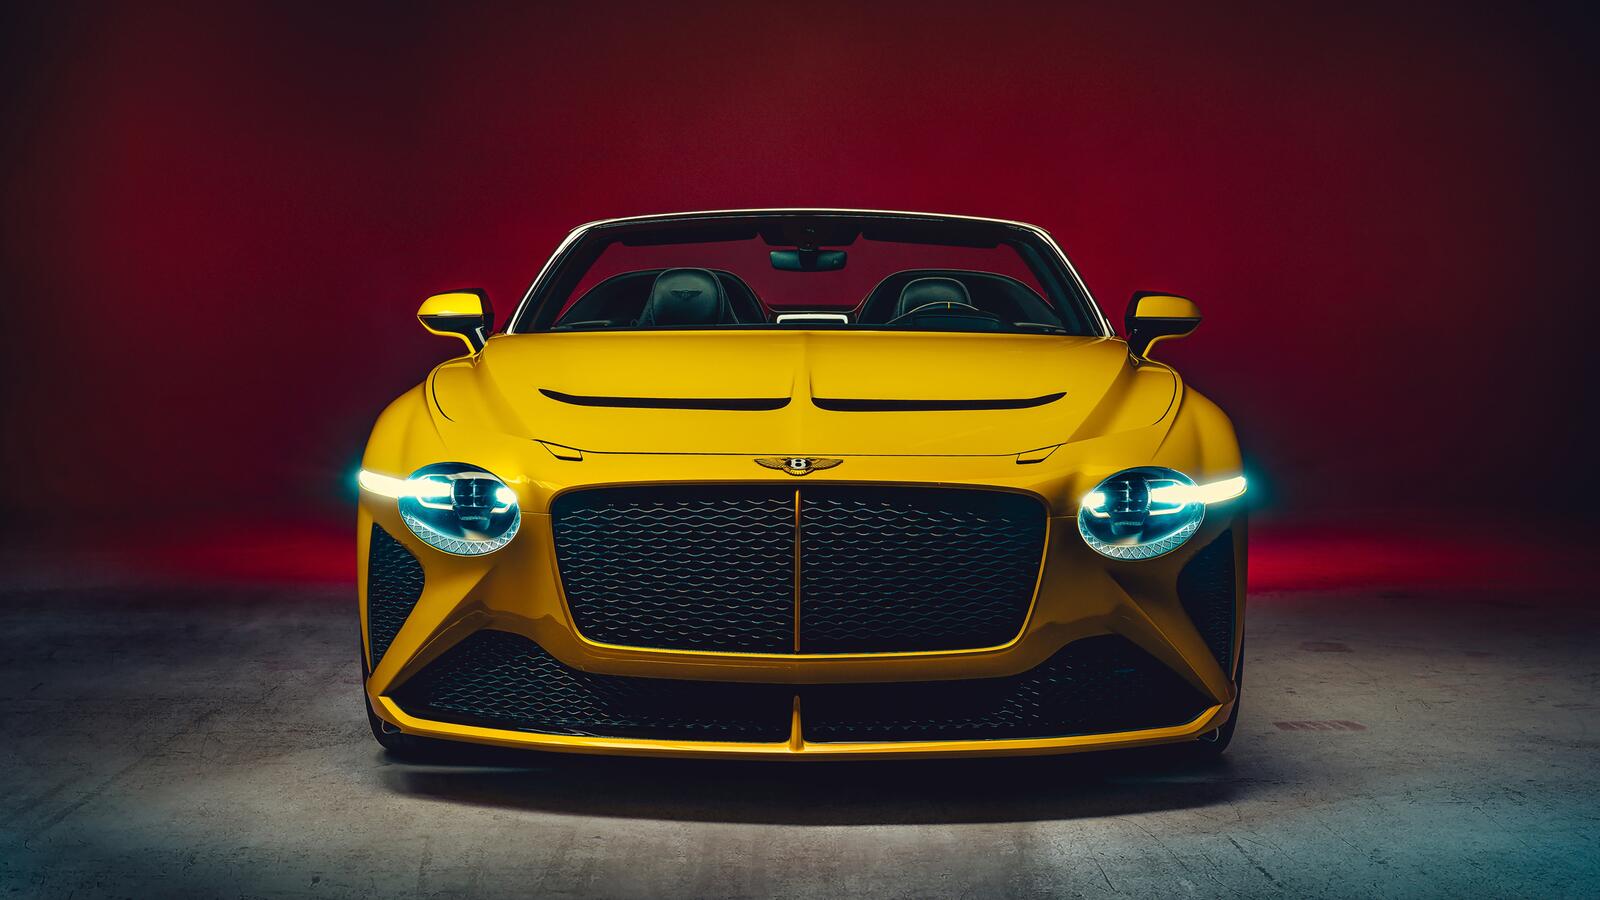 Wallpapers yellow front view luxury cars on the desktop